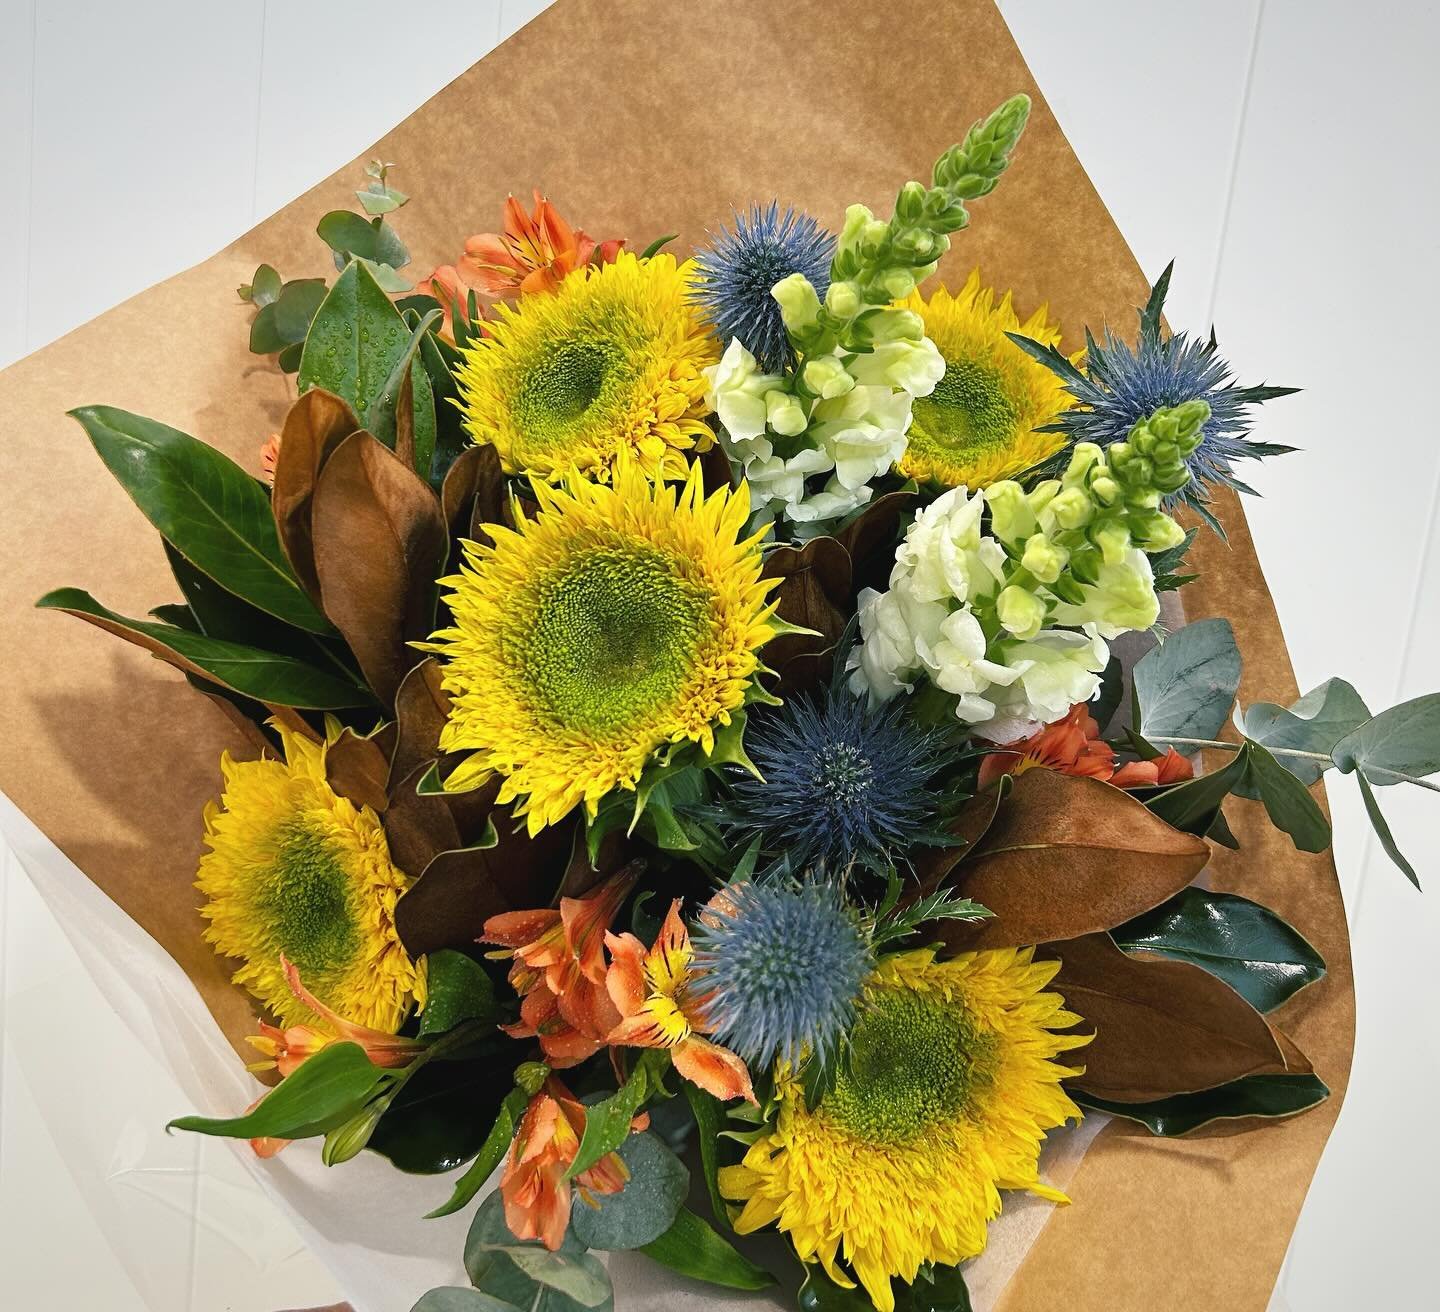 A Bunch of Fresh Bright Blooms to brighten up your day. Order online or in-store today.